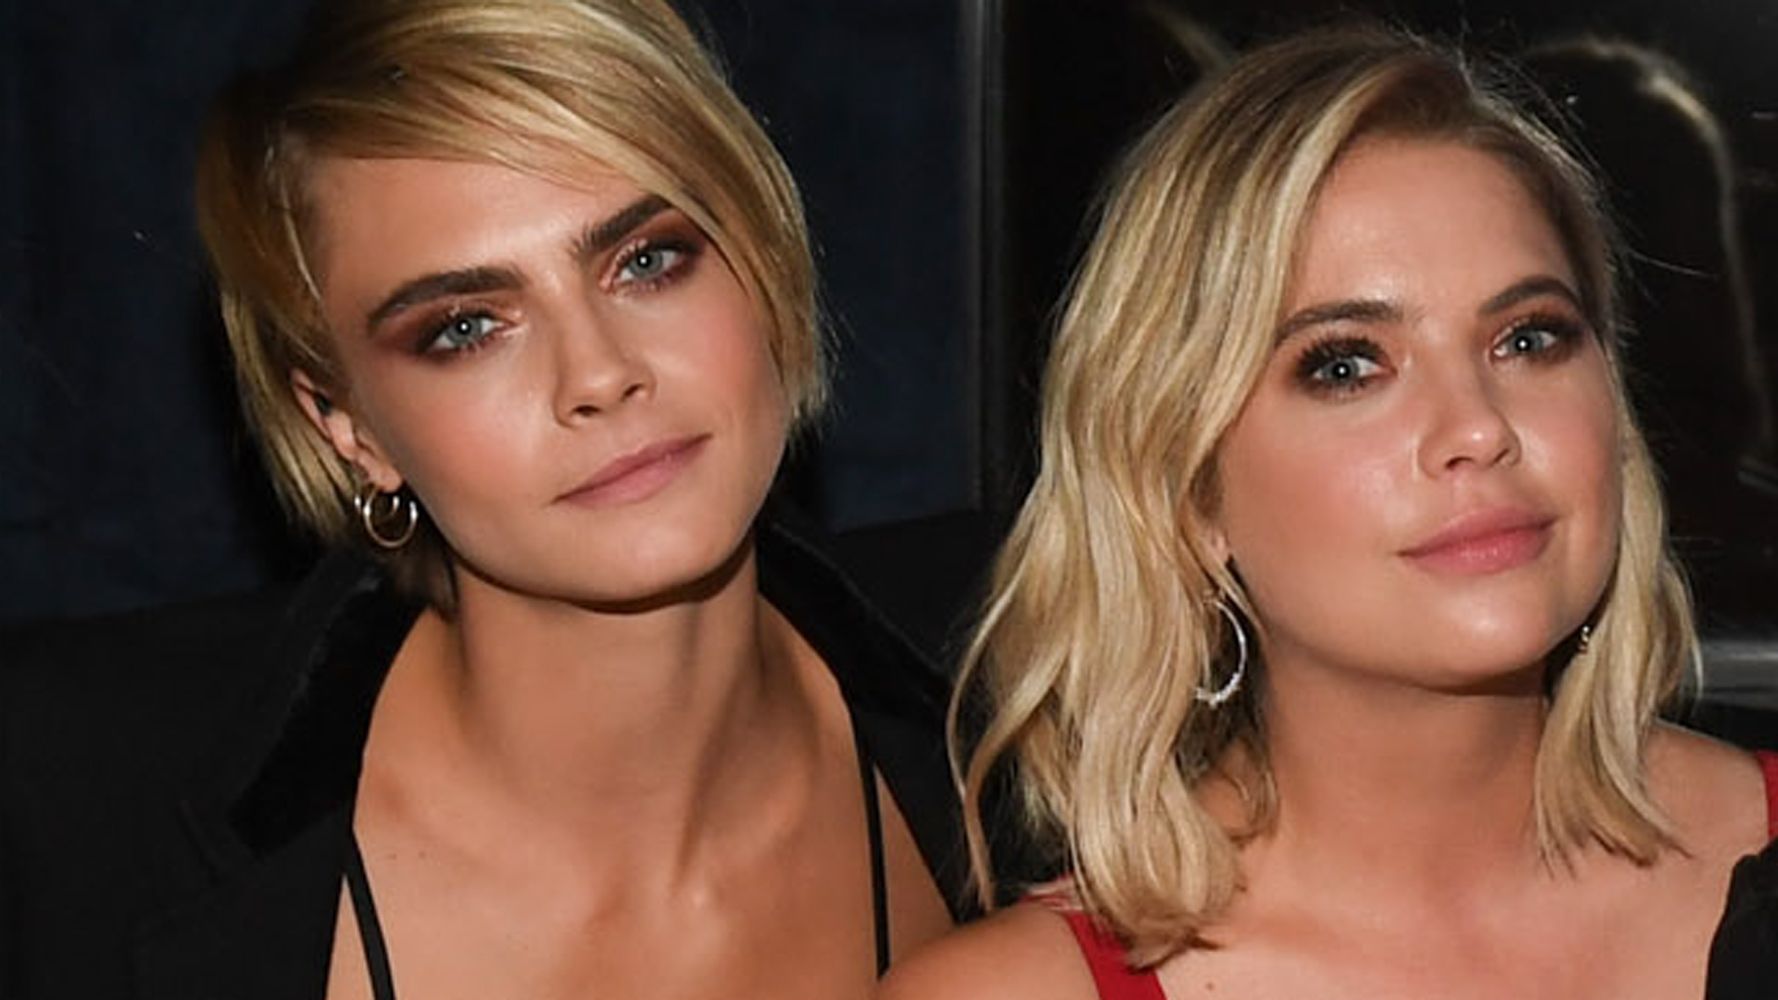 Ashley Benson Porn - Ashley Benson Confirms She's Dating Cara Delevingne With Instagram Comment  | Marie Claire